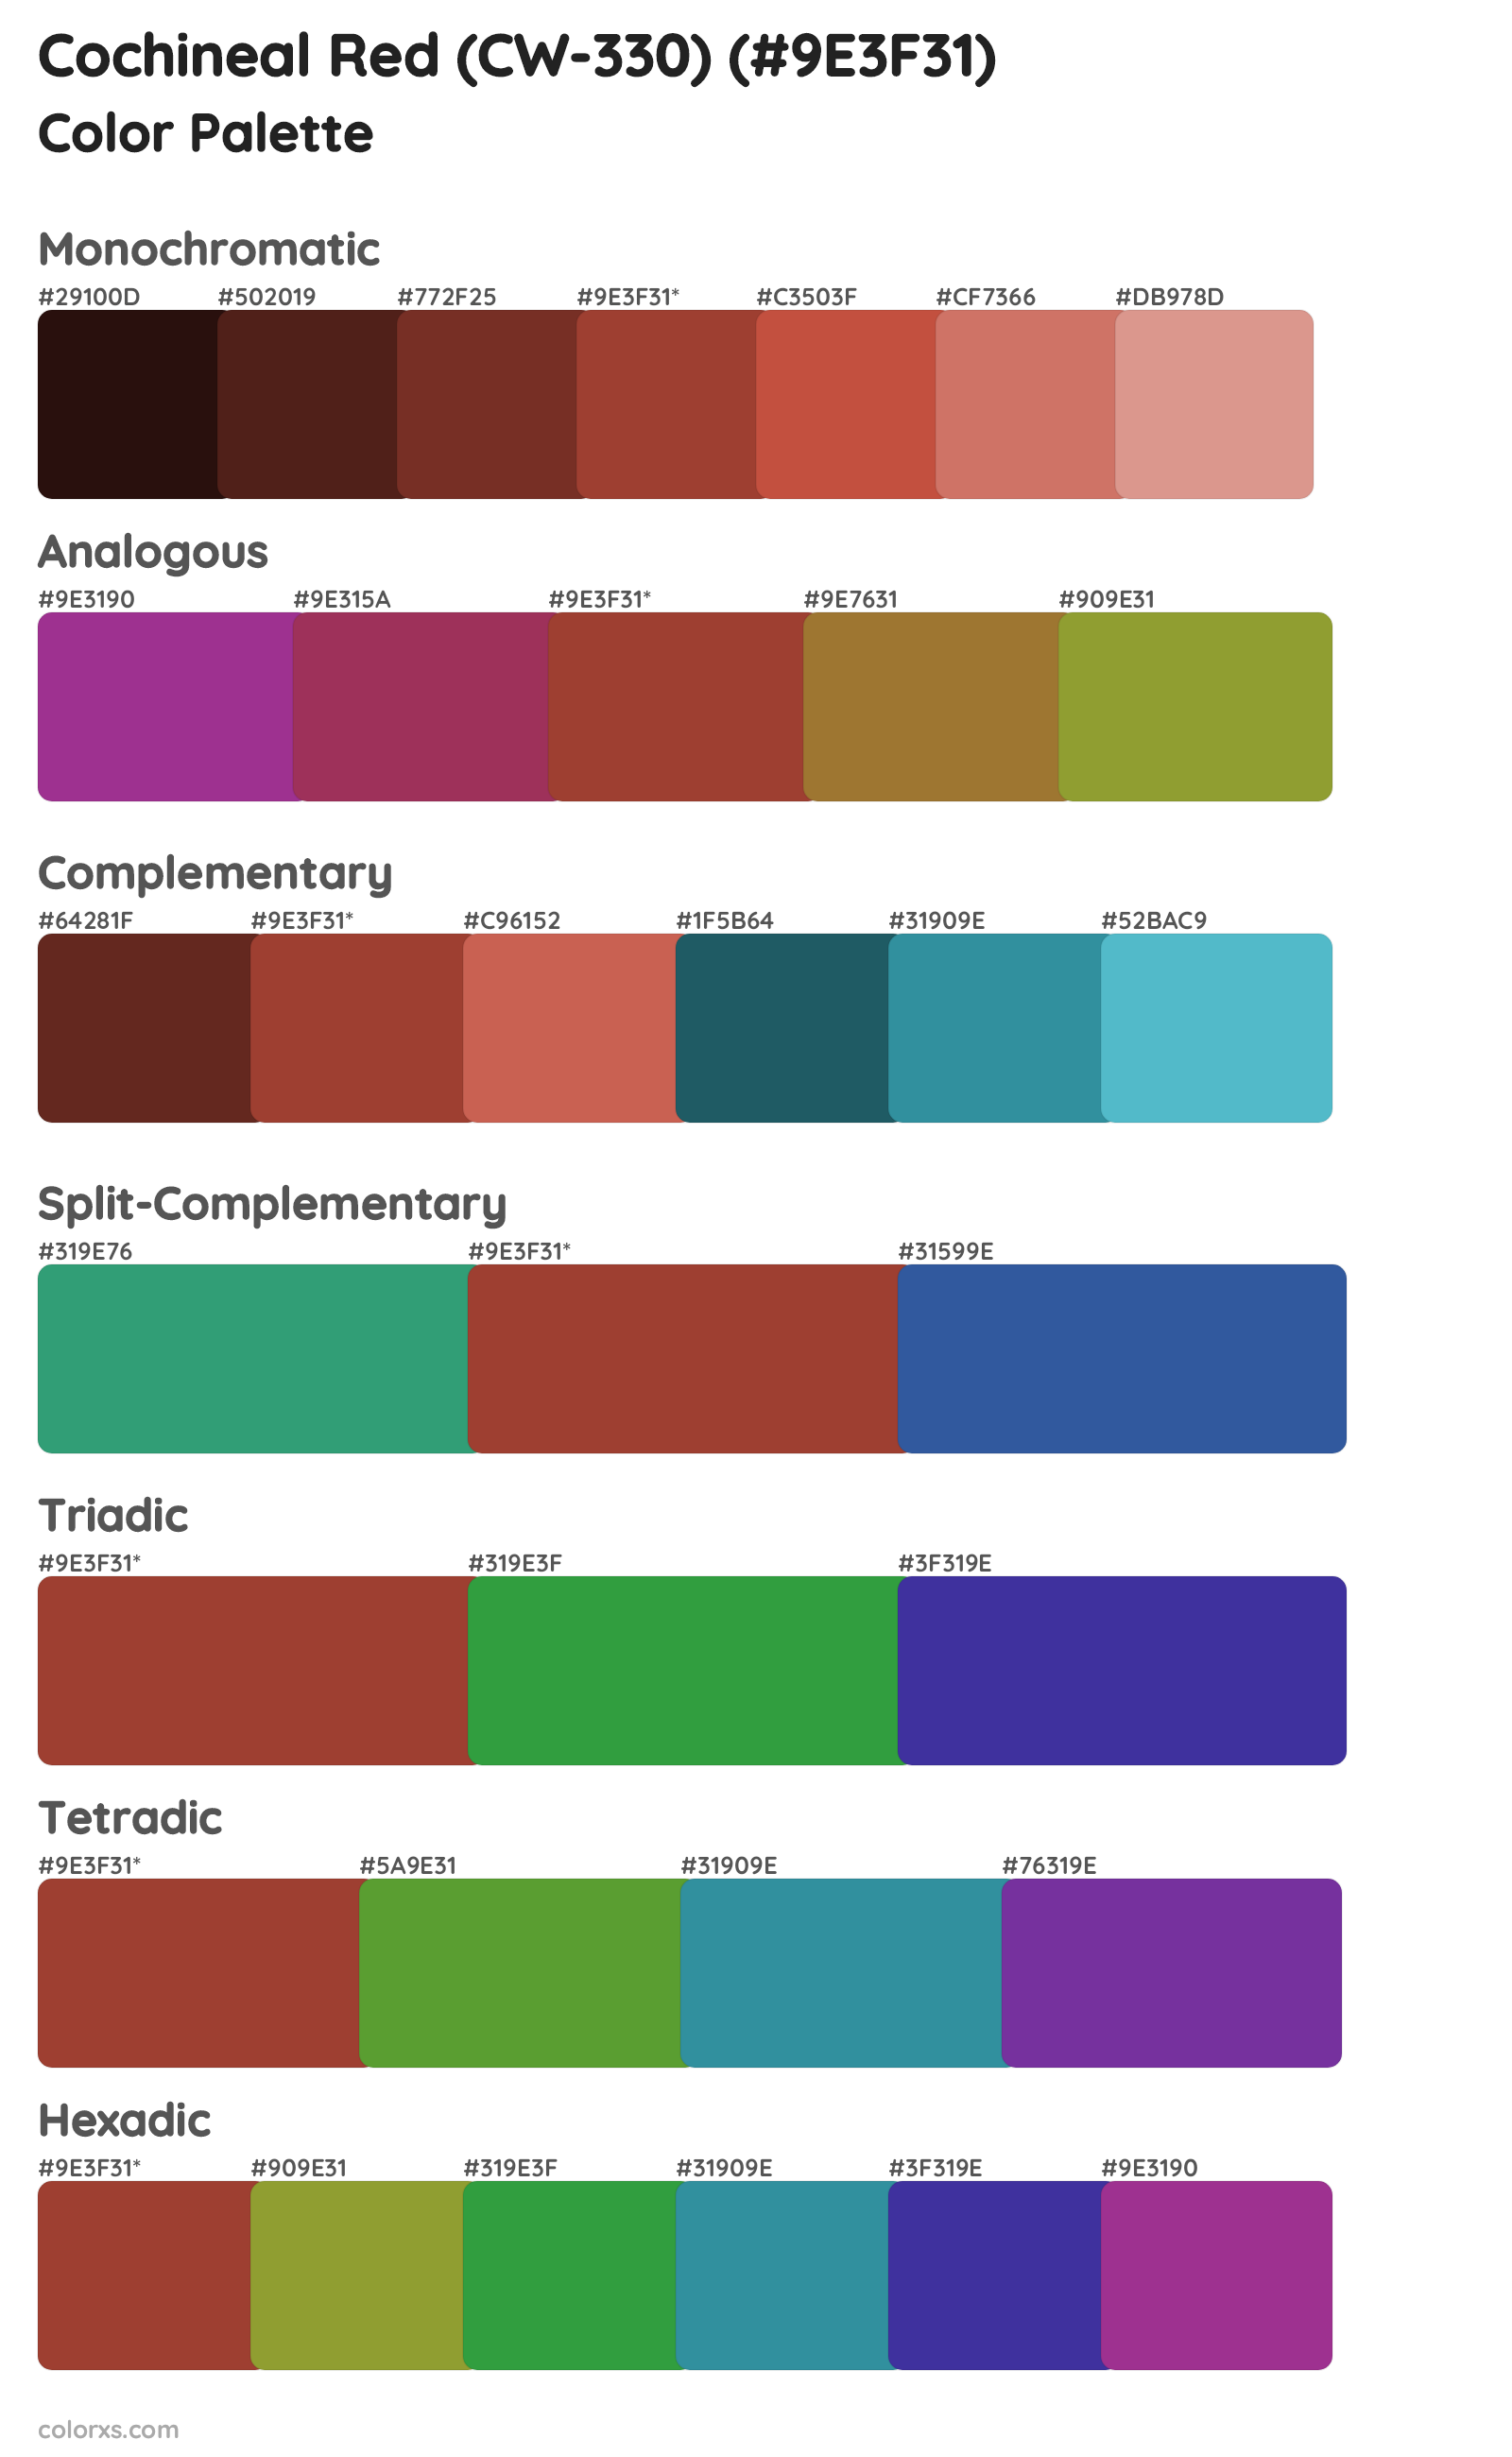 Cochineal Red (CW-330) Color Scheme Palettes